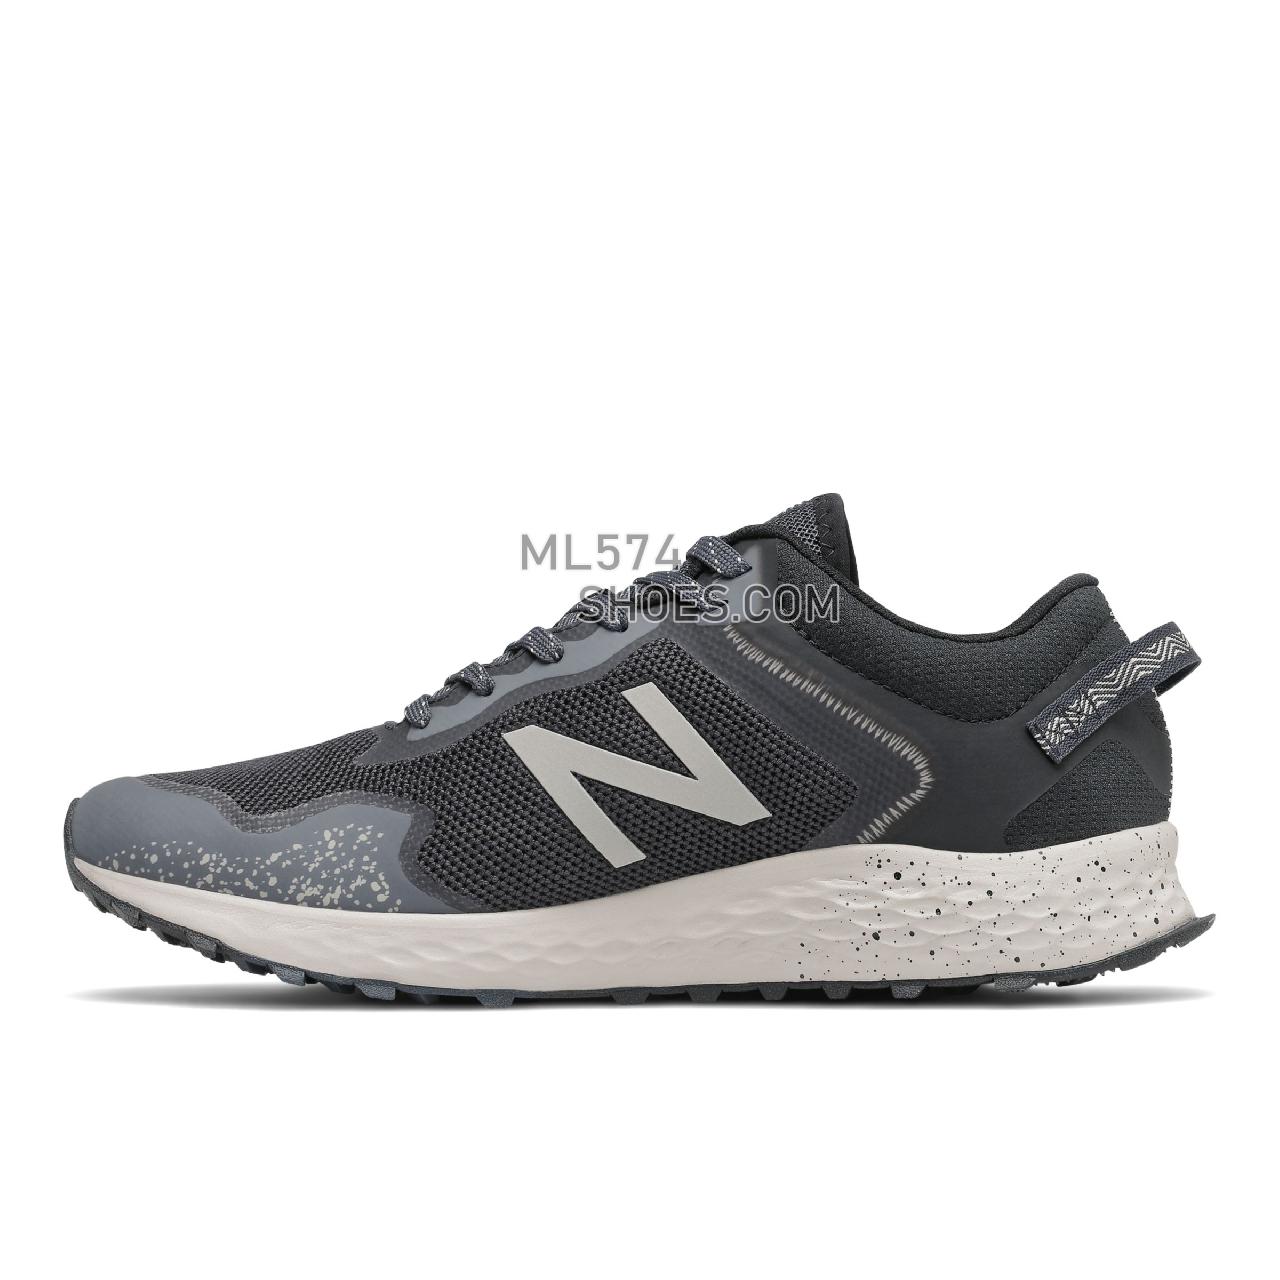 New Balance FreshFoam Arishi Trail - Men's Trail Running - Outer Space with Black and Timberwolf - MTARISCK